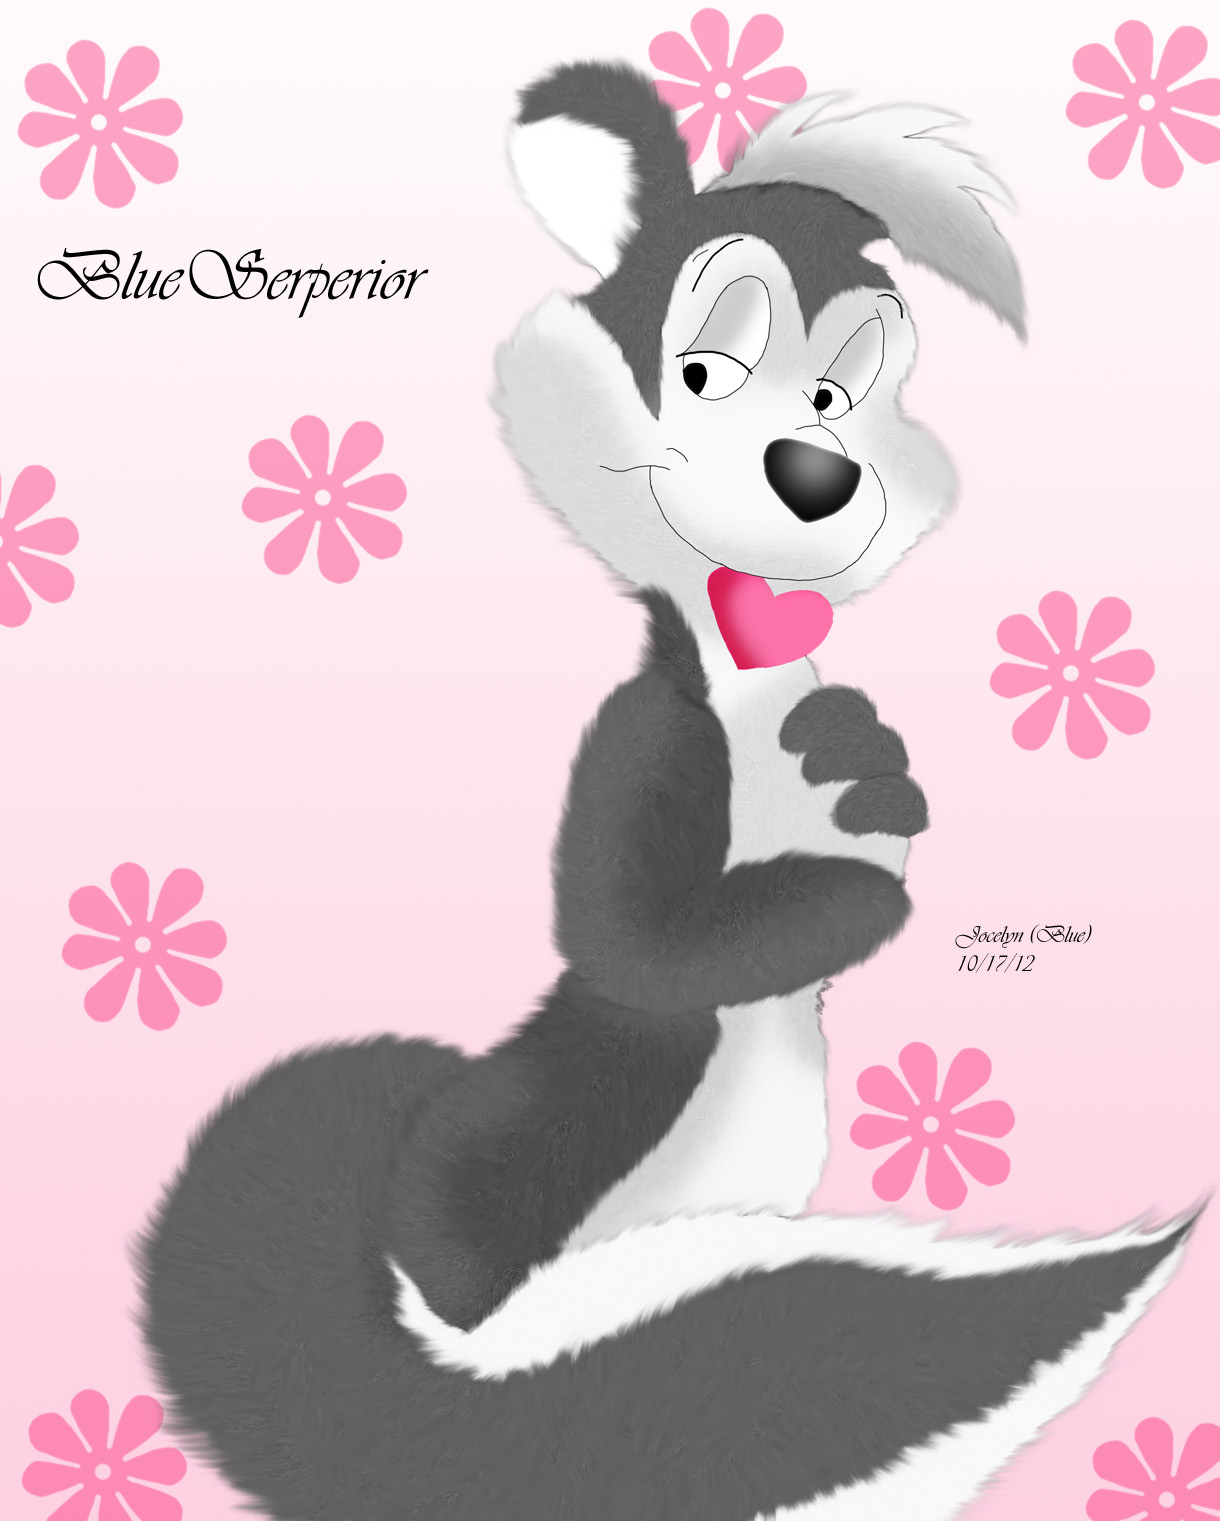 Pepe Le Pew by BlueySerperior